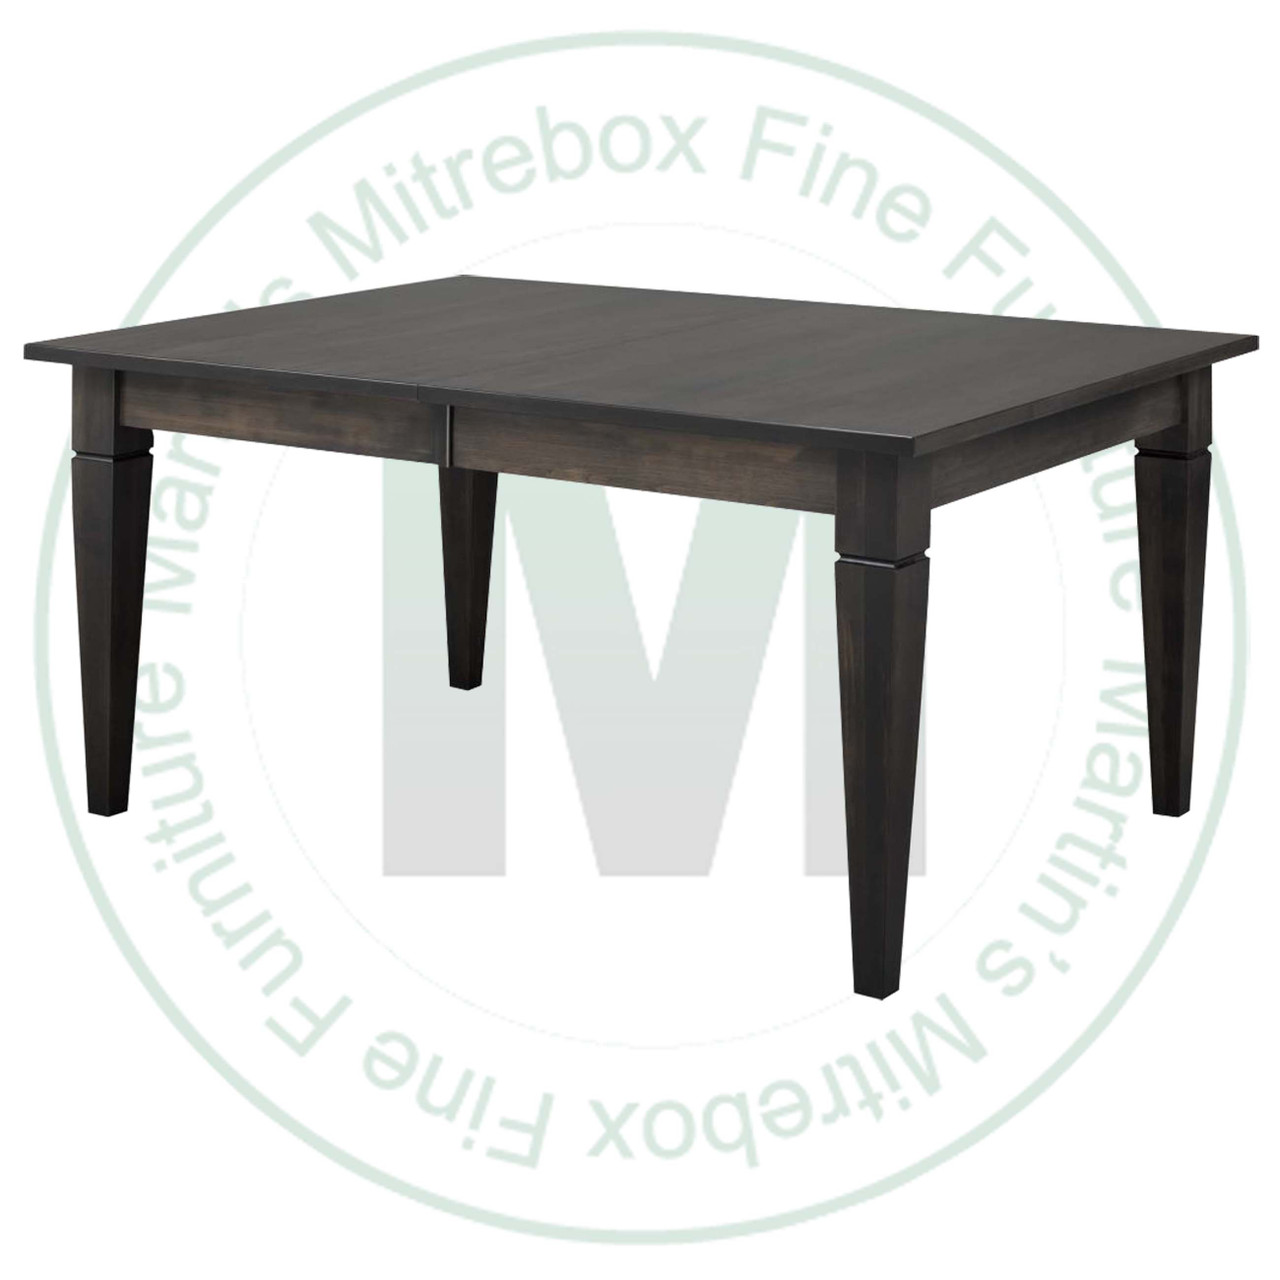 Wormy Maple Reesor Solid Top Harvest Table 36''D x 84''W x 30''H Table Has 1'' Thick Top And 2 - 16'' Extensions